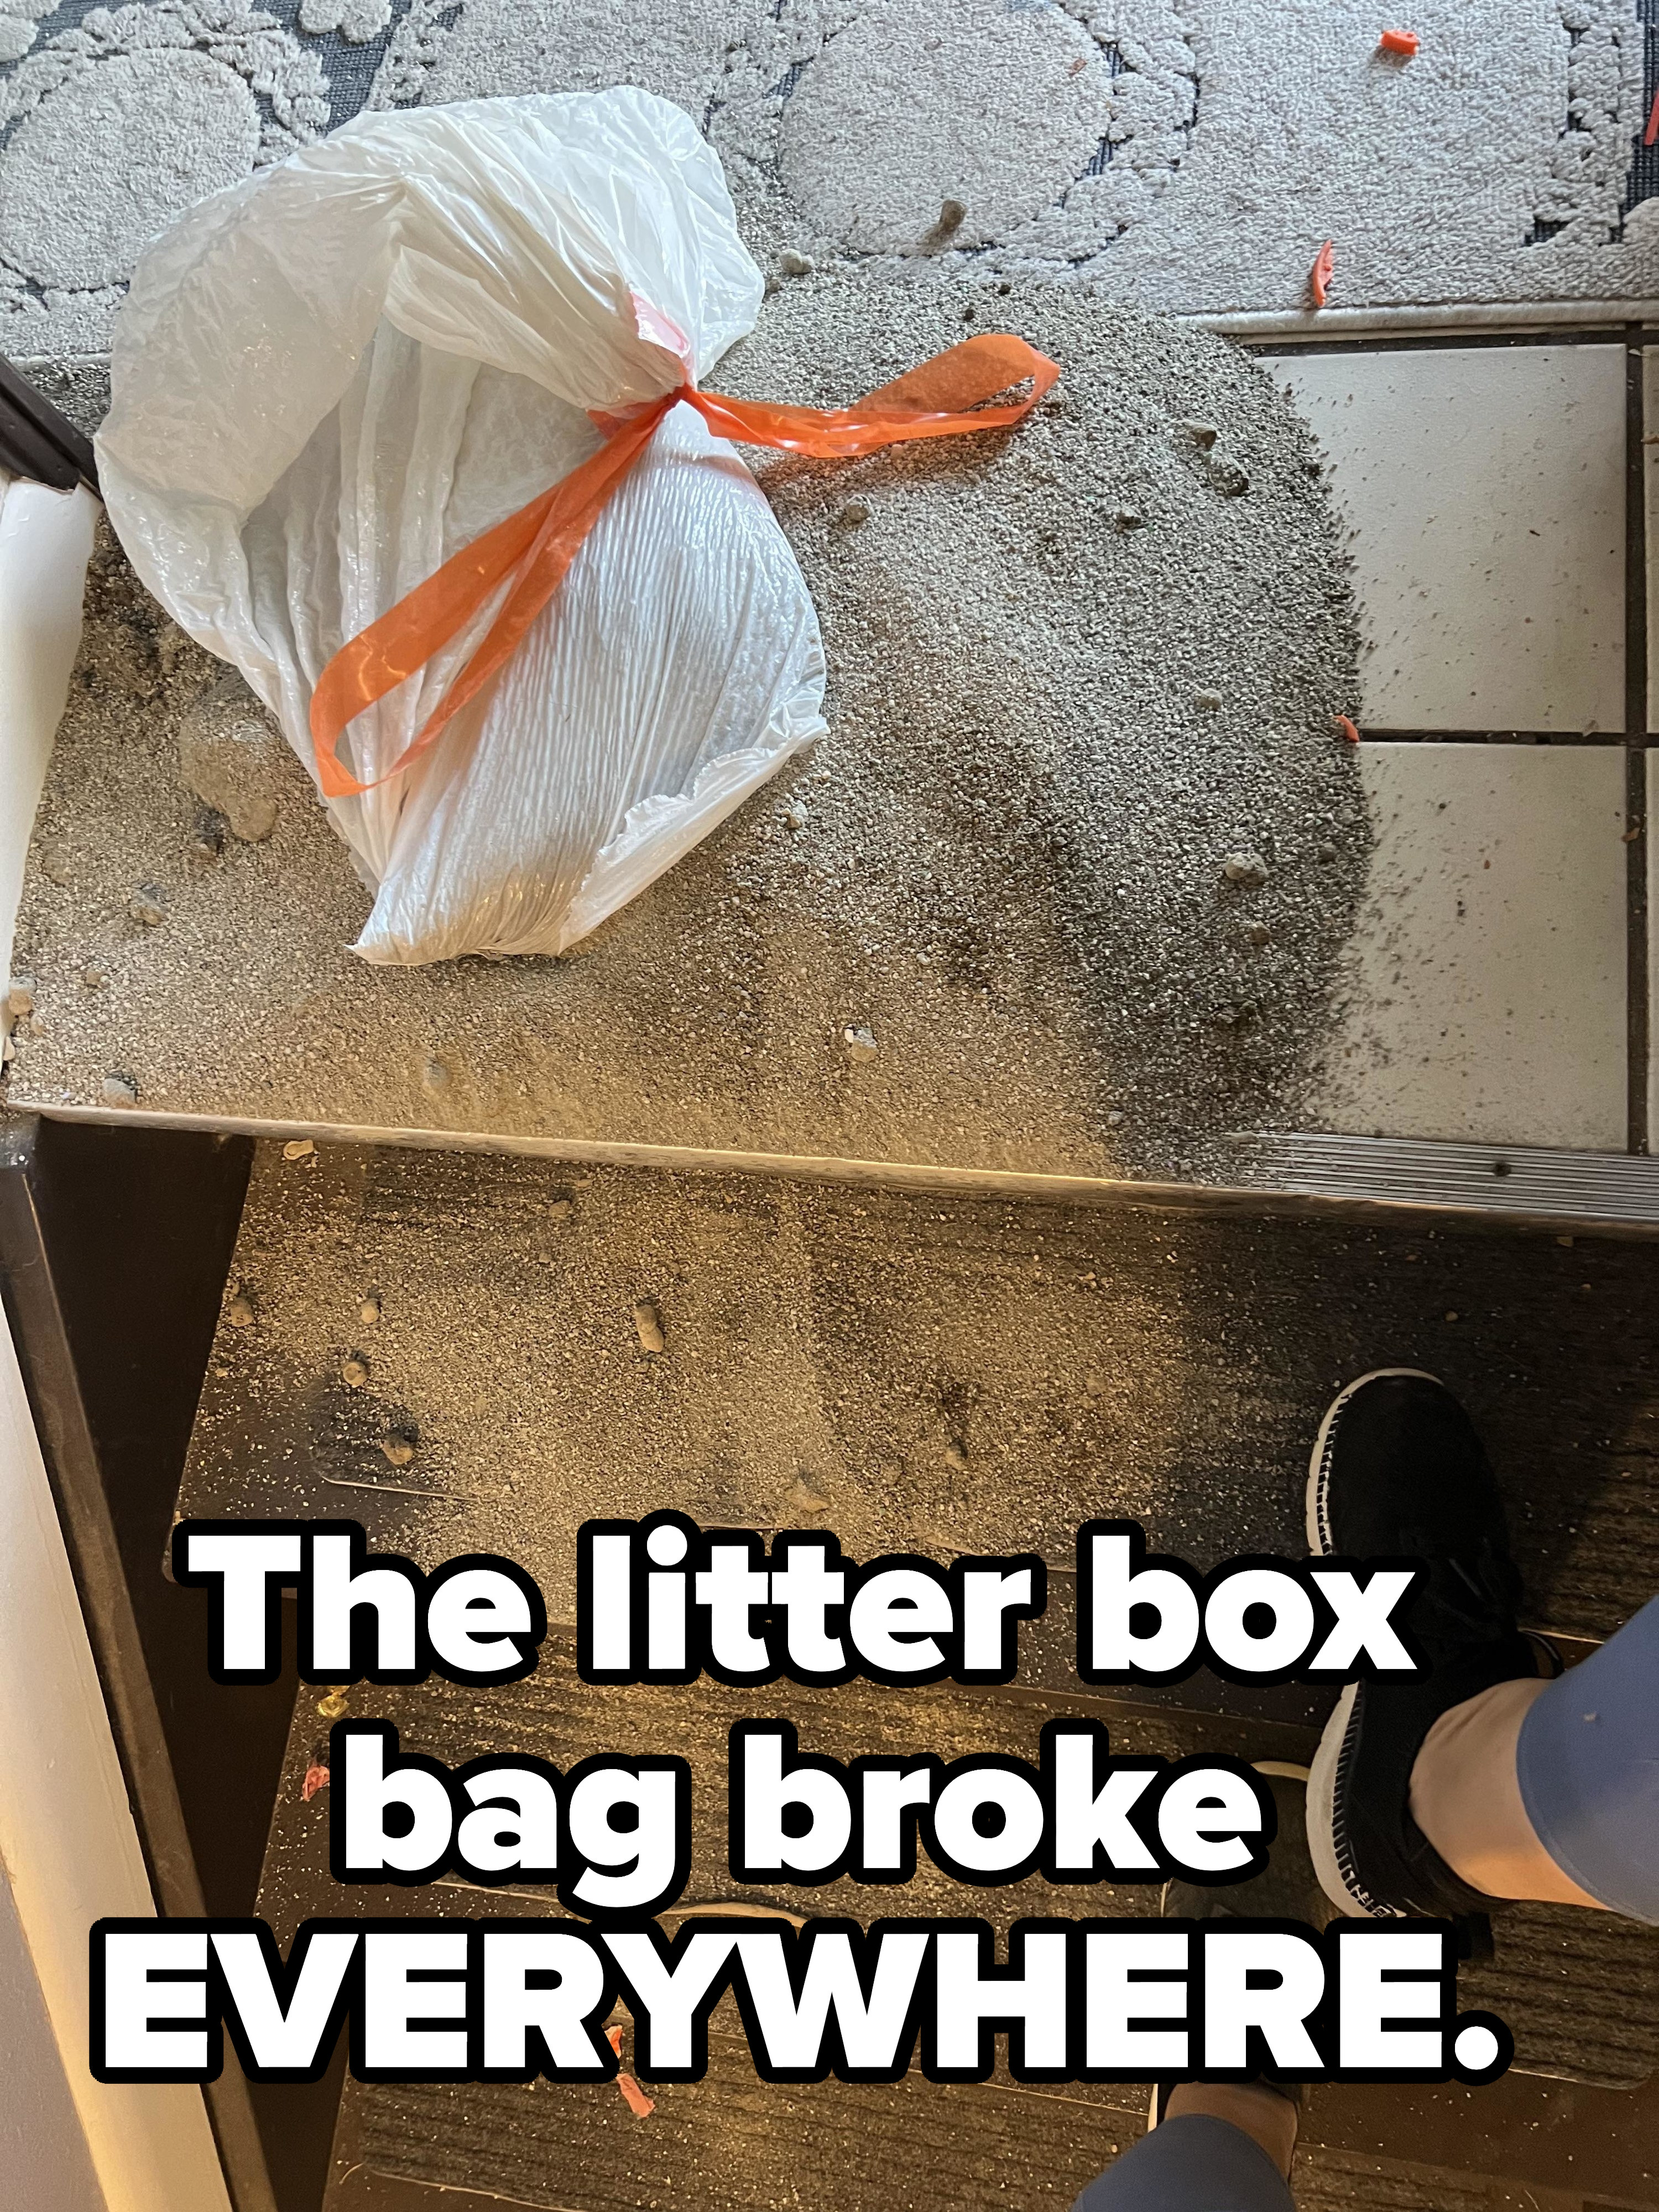 A flight of stairs with sand all over it, with the caption &quot;The litter box bag broke EVERYWHERE&quot;